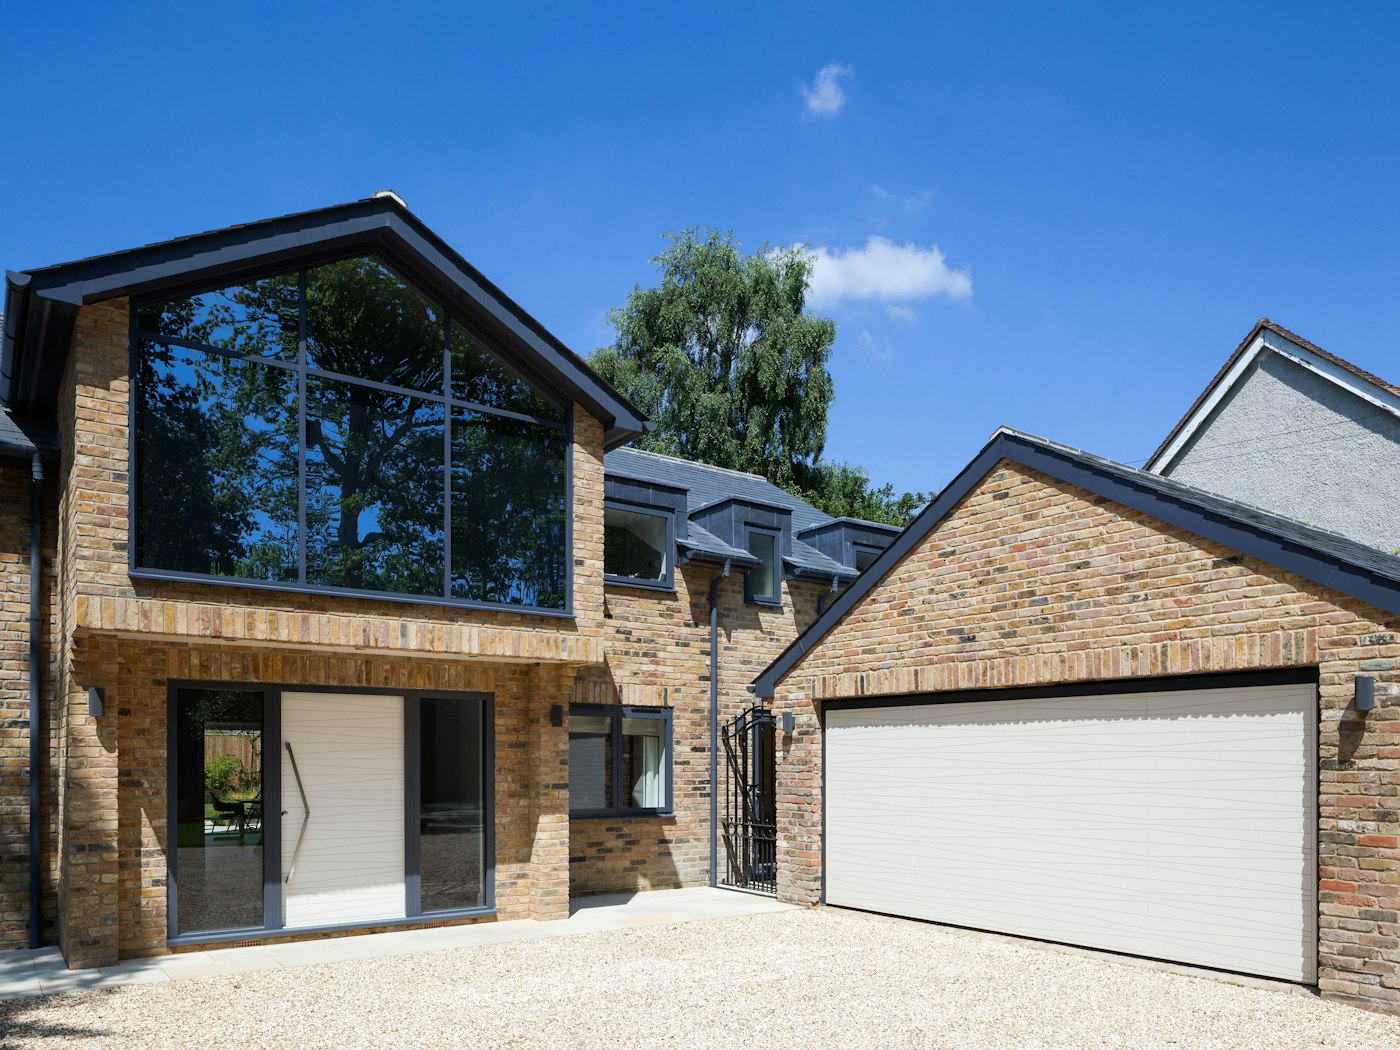 This contemporary house features white painted matching front & garage doors